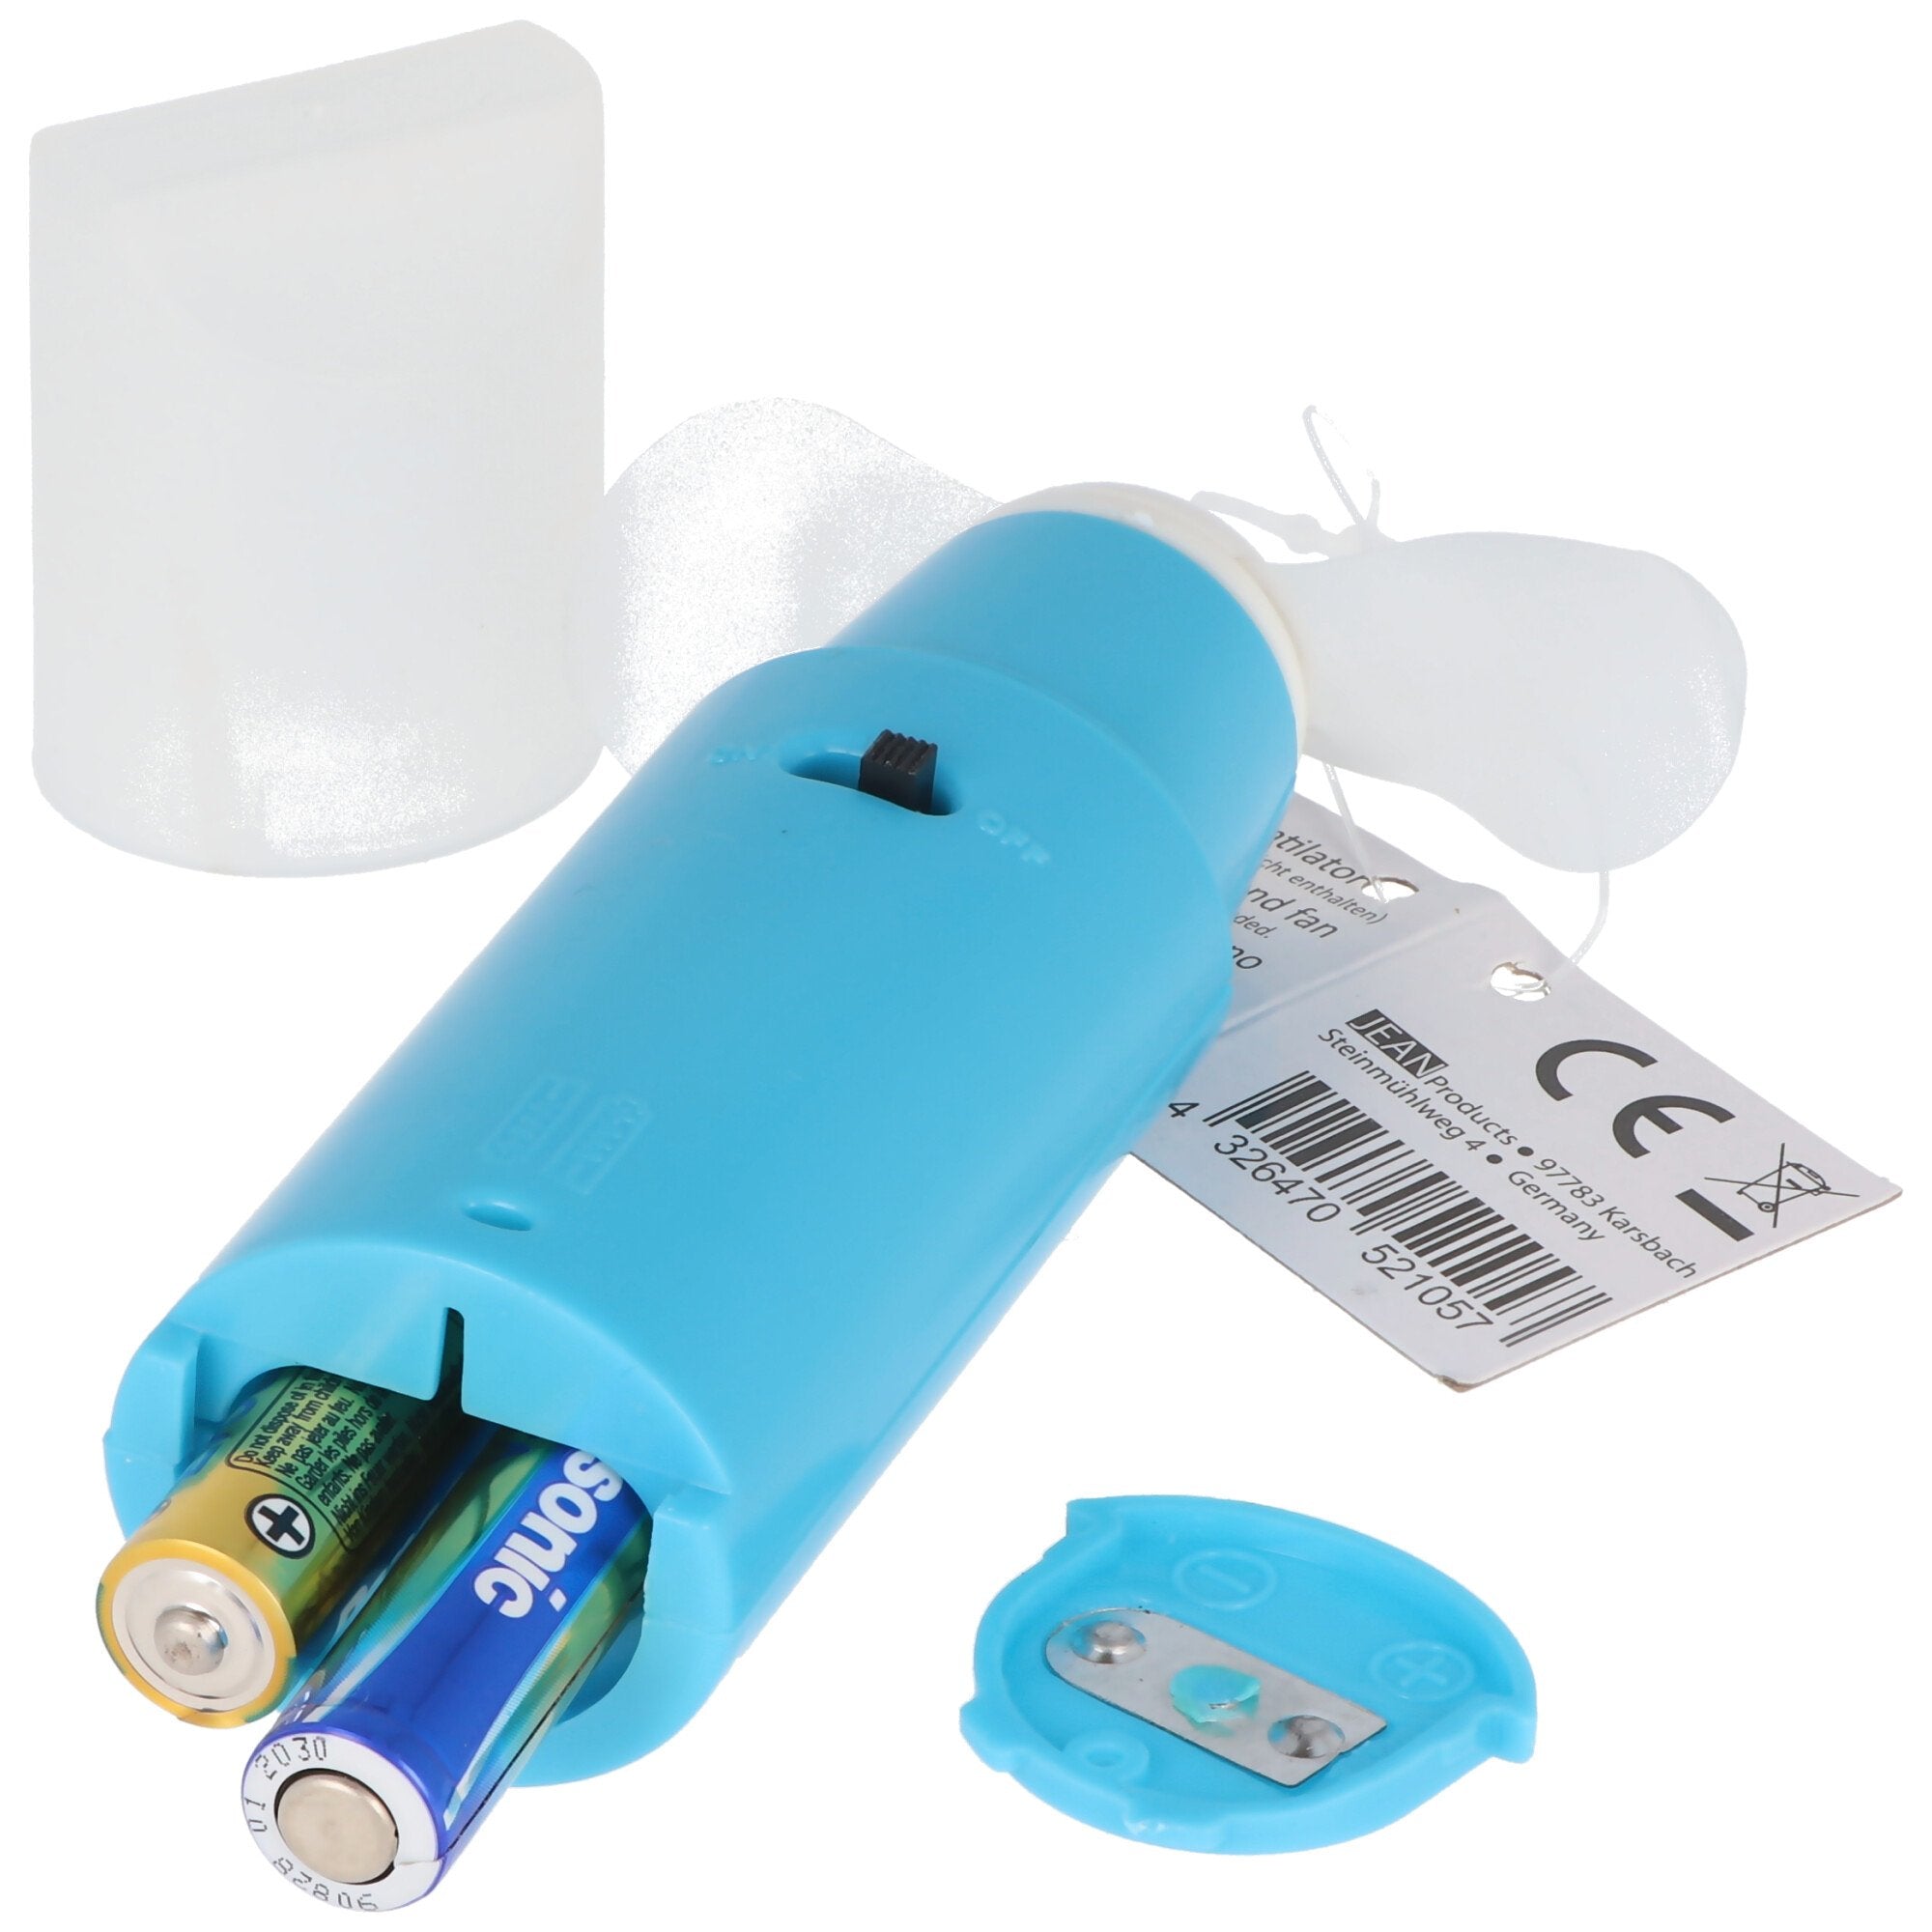 Mini fan with lid, hand fan, sorted by colour, including 2x micro AAA batteries